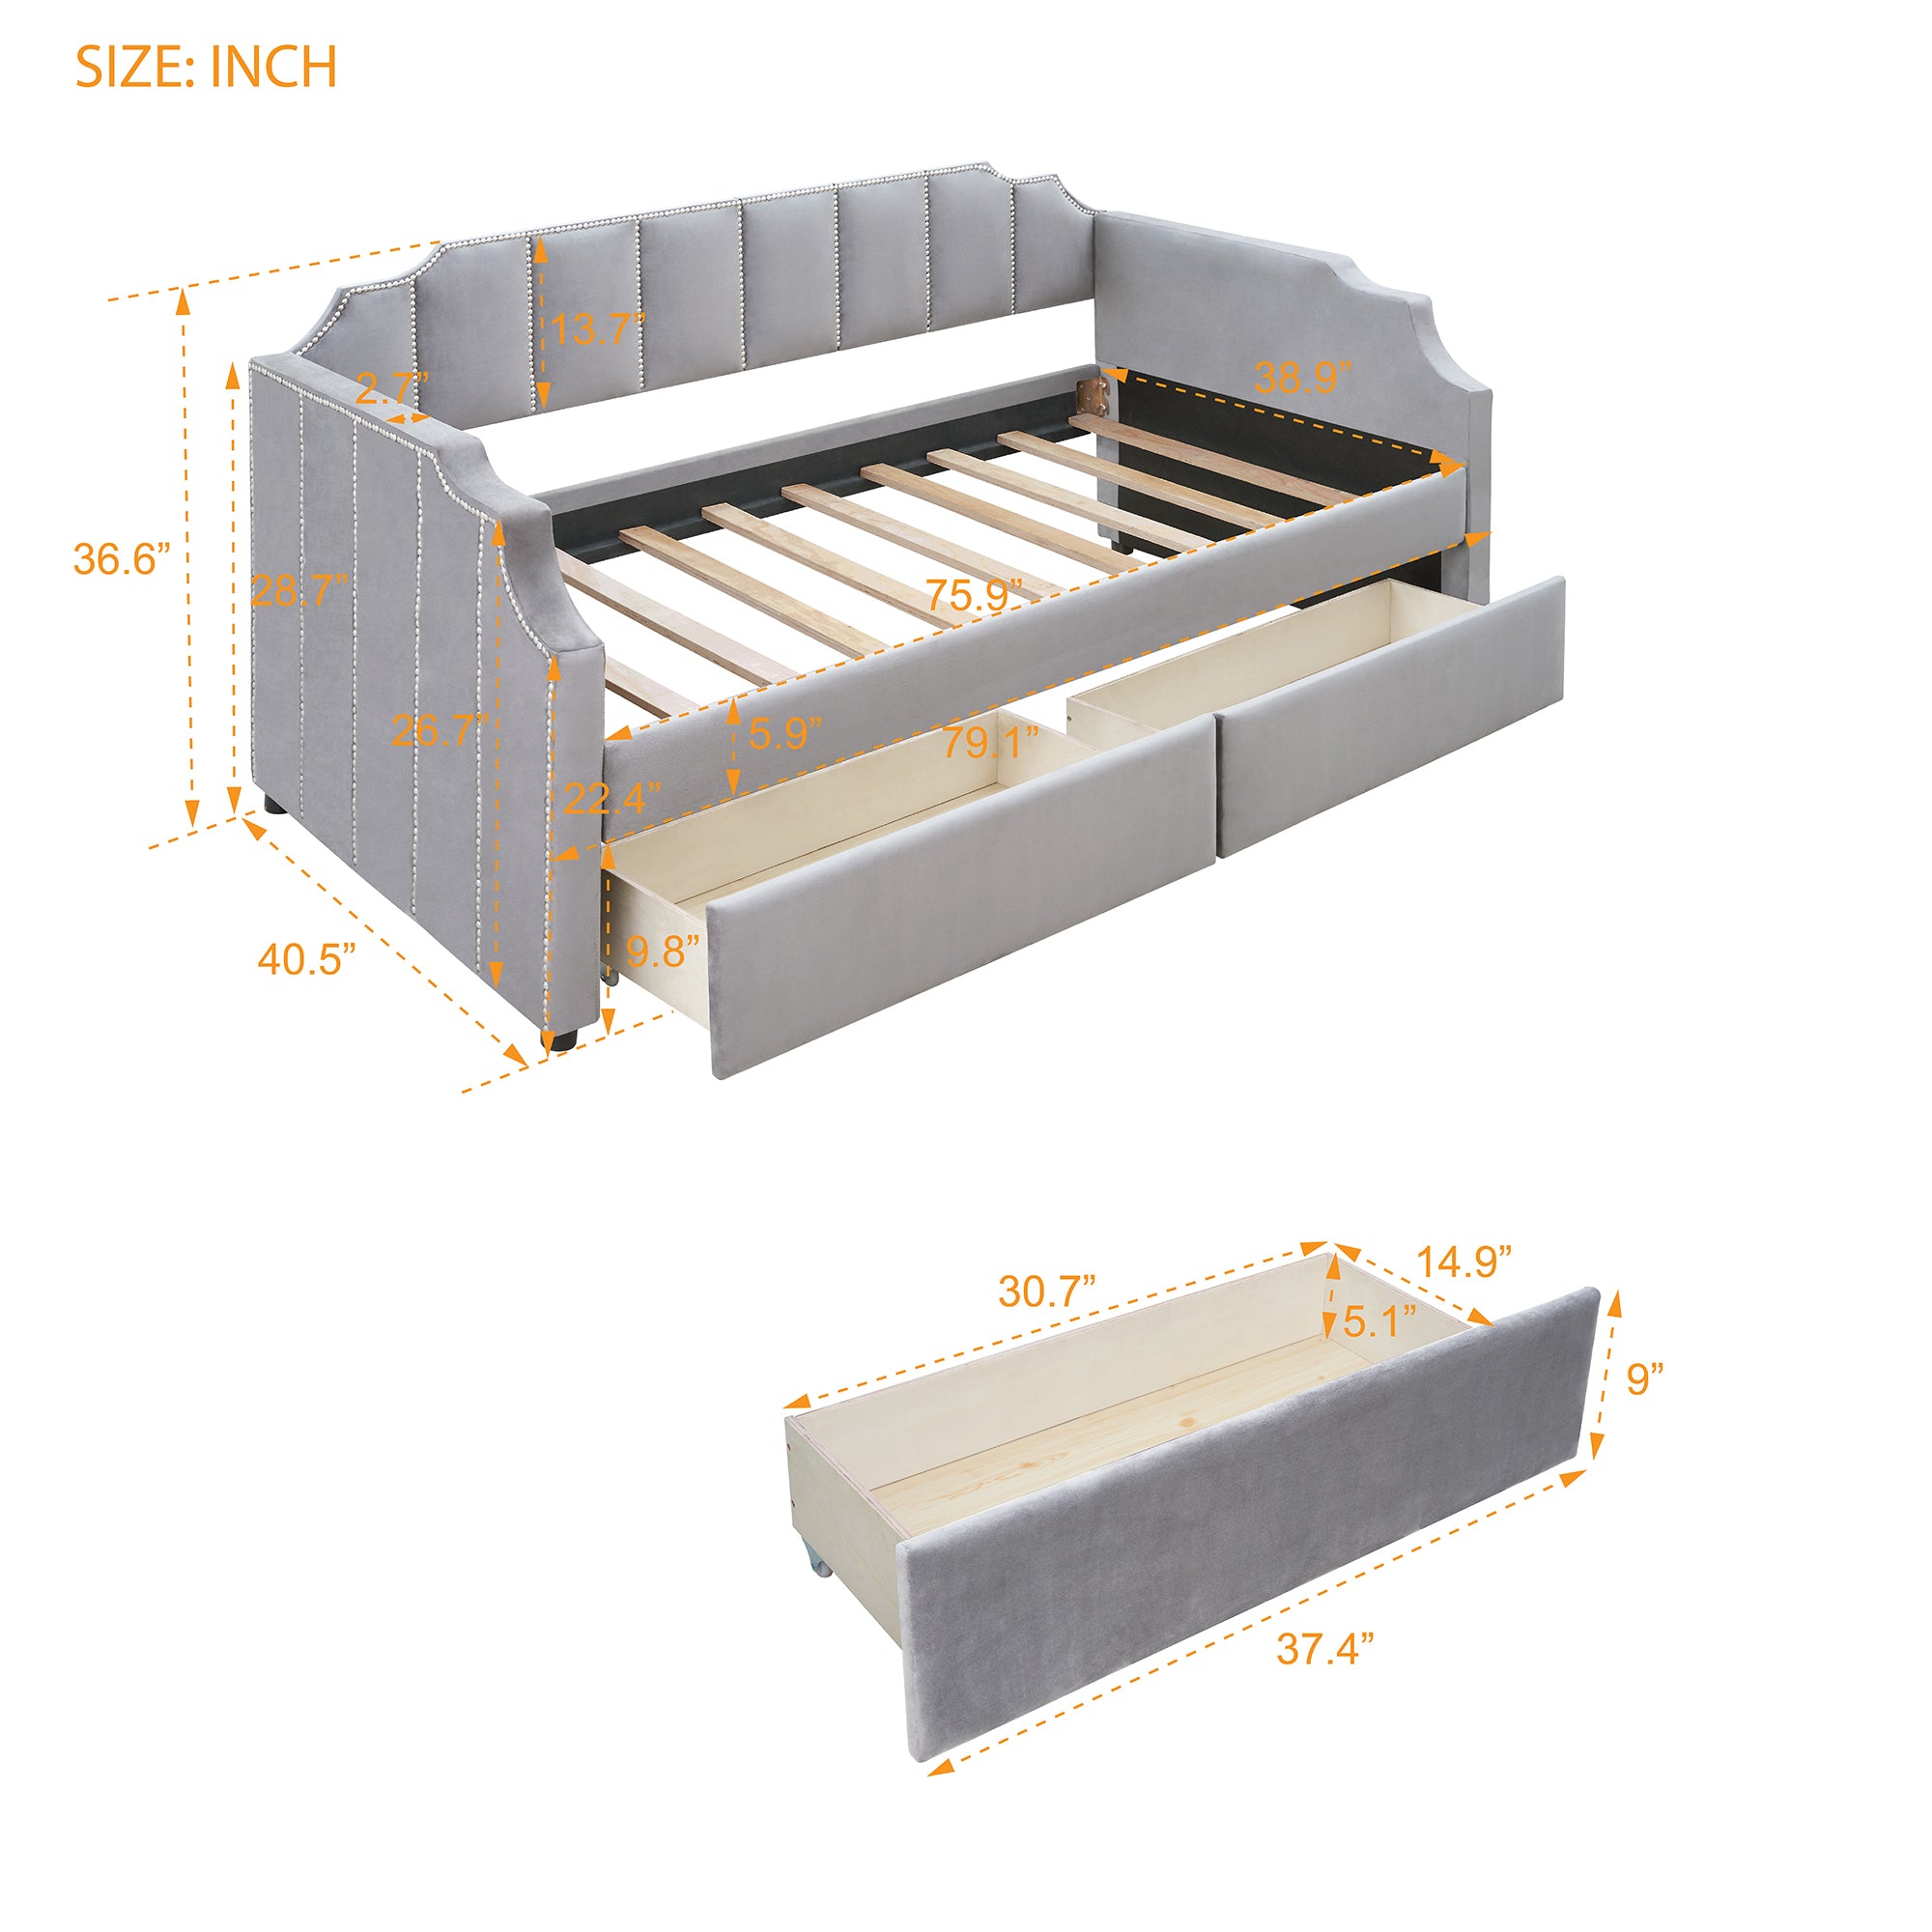 NOBLEMOOD Twin Size Upholstered Daybed with Two Storage Drawers for Kids Bedroom,Solid Wooden Bedframe w/Strong Wood Slat Support & Safety Guardrails, Gray